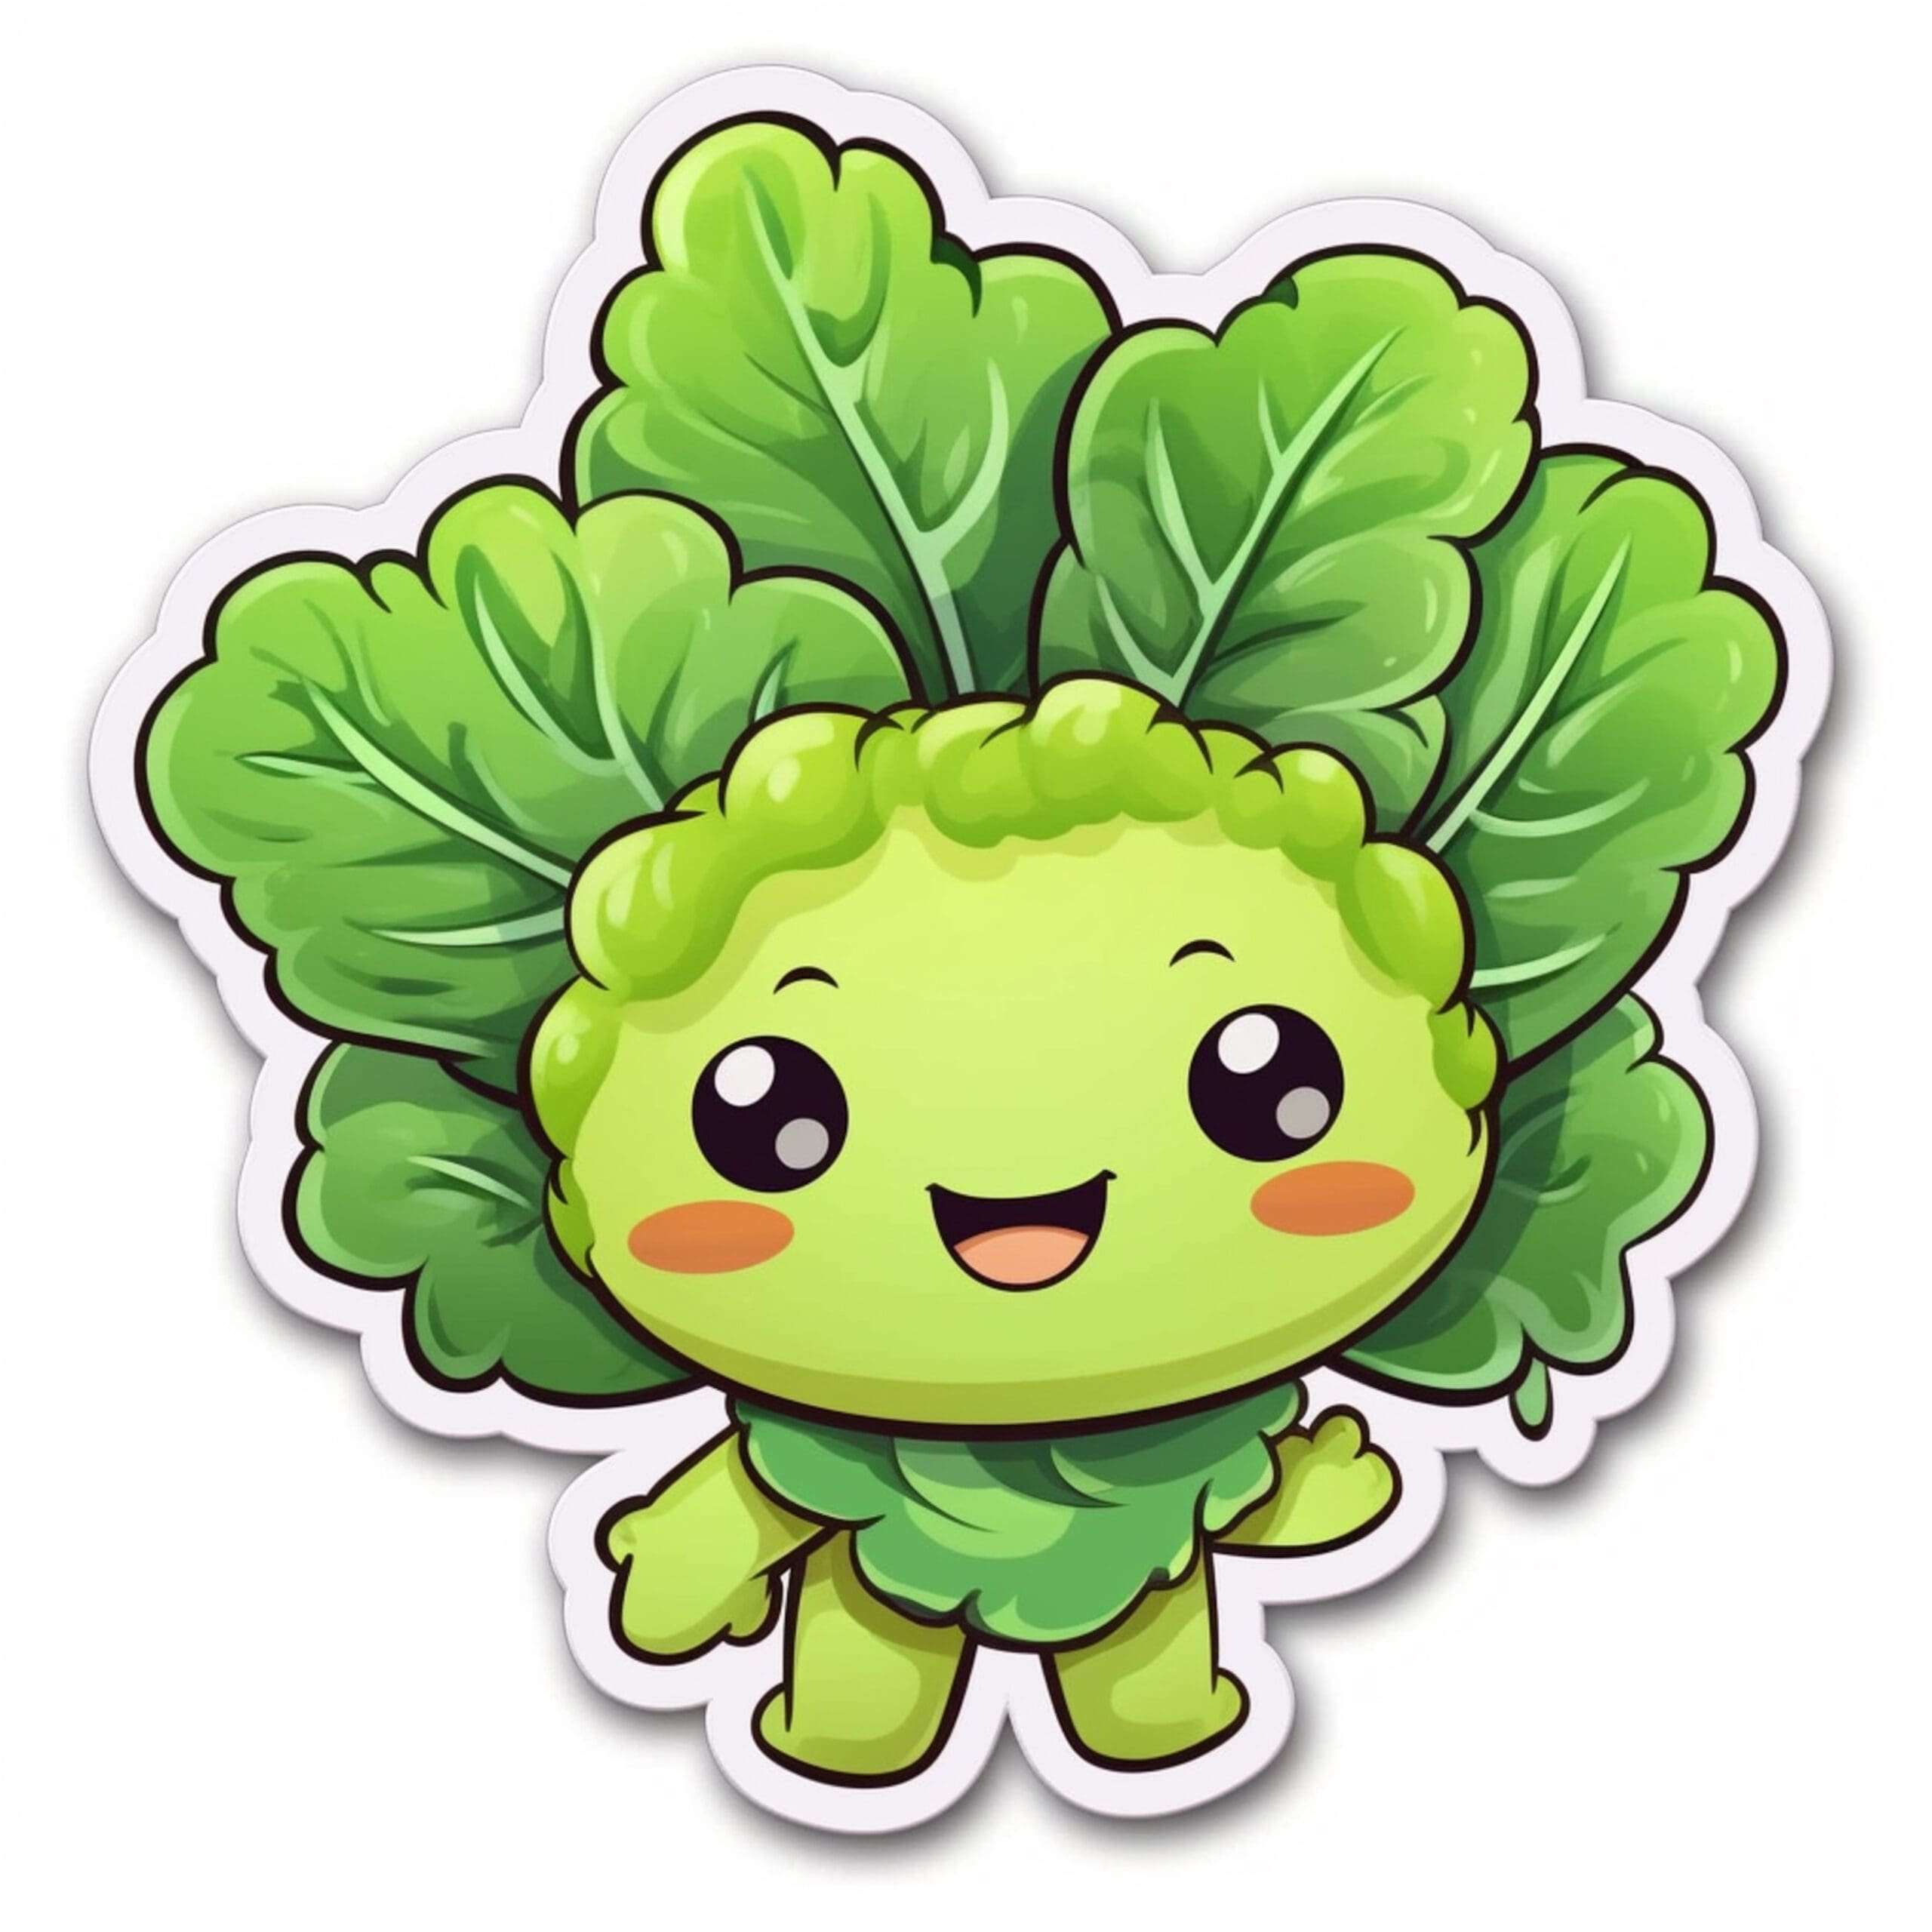 Cartoon graphic of a cheerful kale leaf doing a little dance on a vibrant green background.